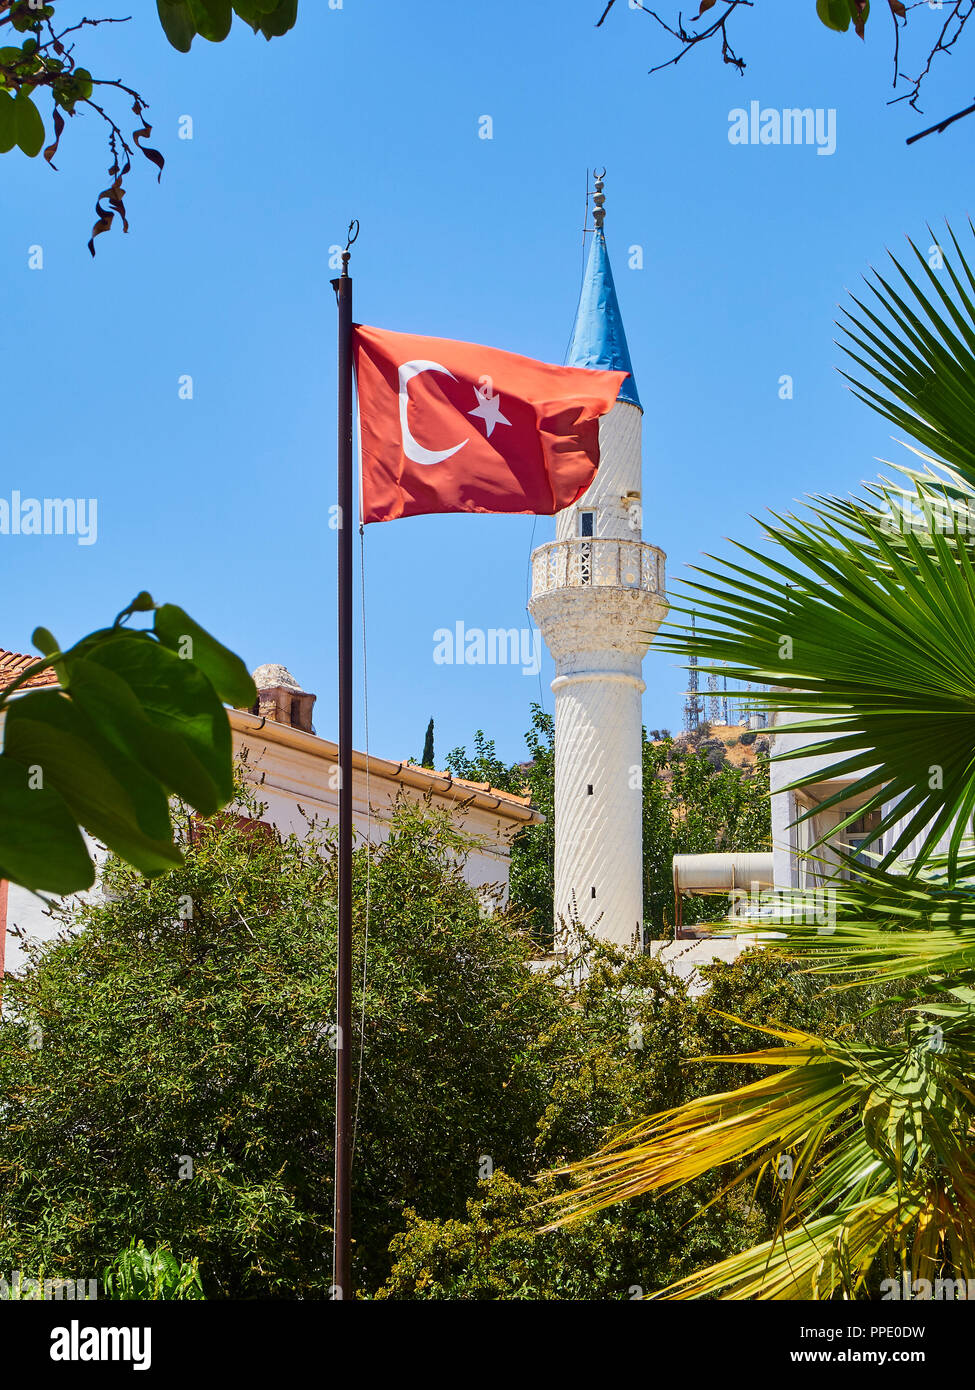 Minaret of Kelerlik Mahallesi Cami mosque with the official flag of the Republic of Turkey waving in the foreground. Stock Photo